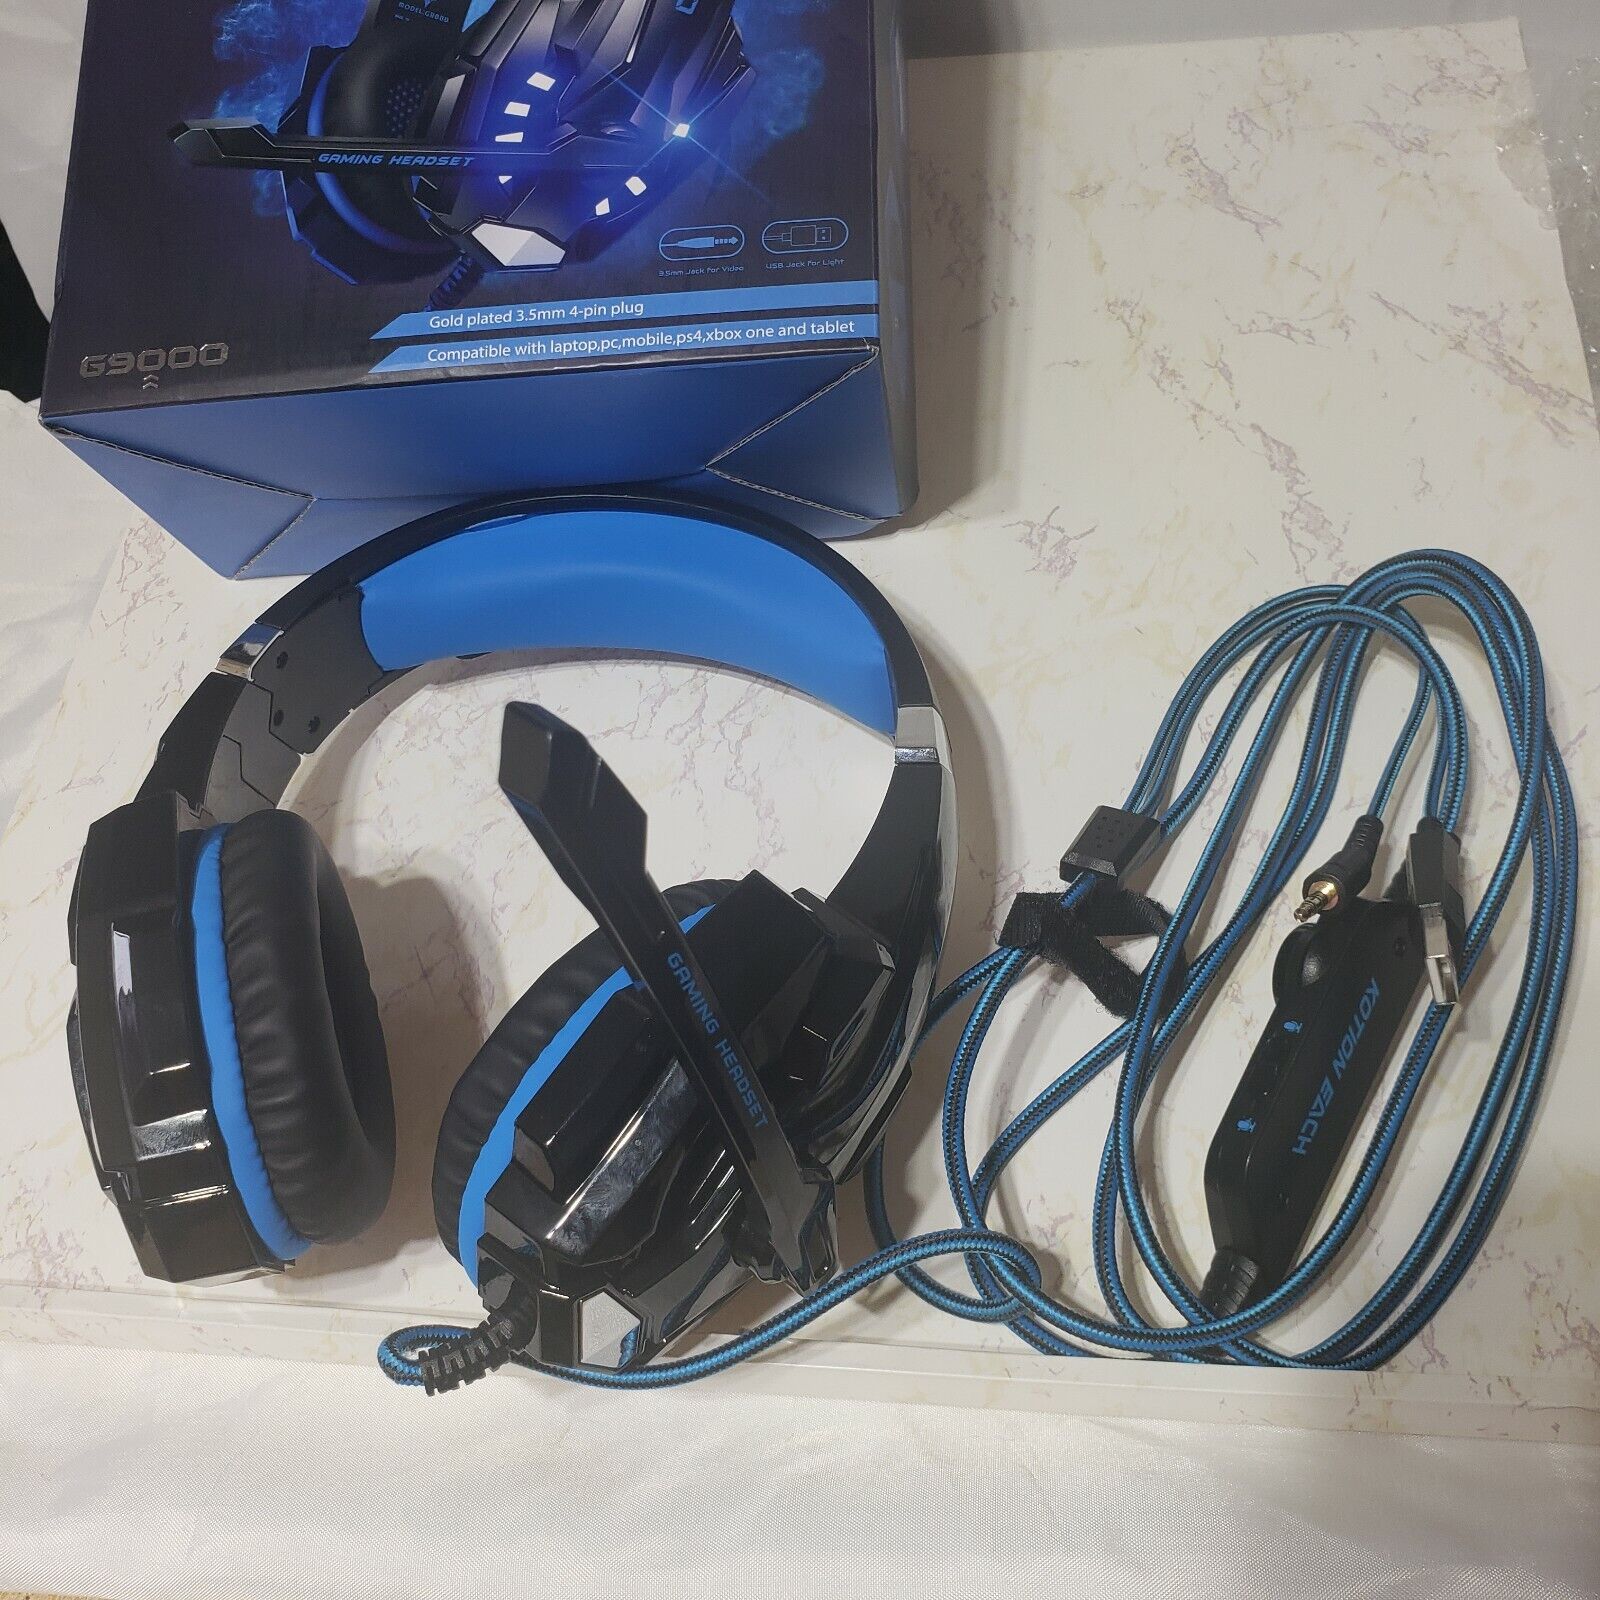 BENGOO G9000 Stereo Pro Gaming Headset Noise Cancelling LED Lights 